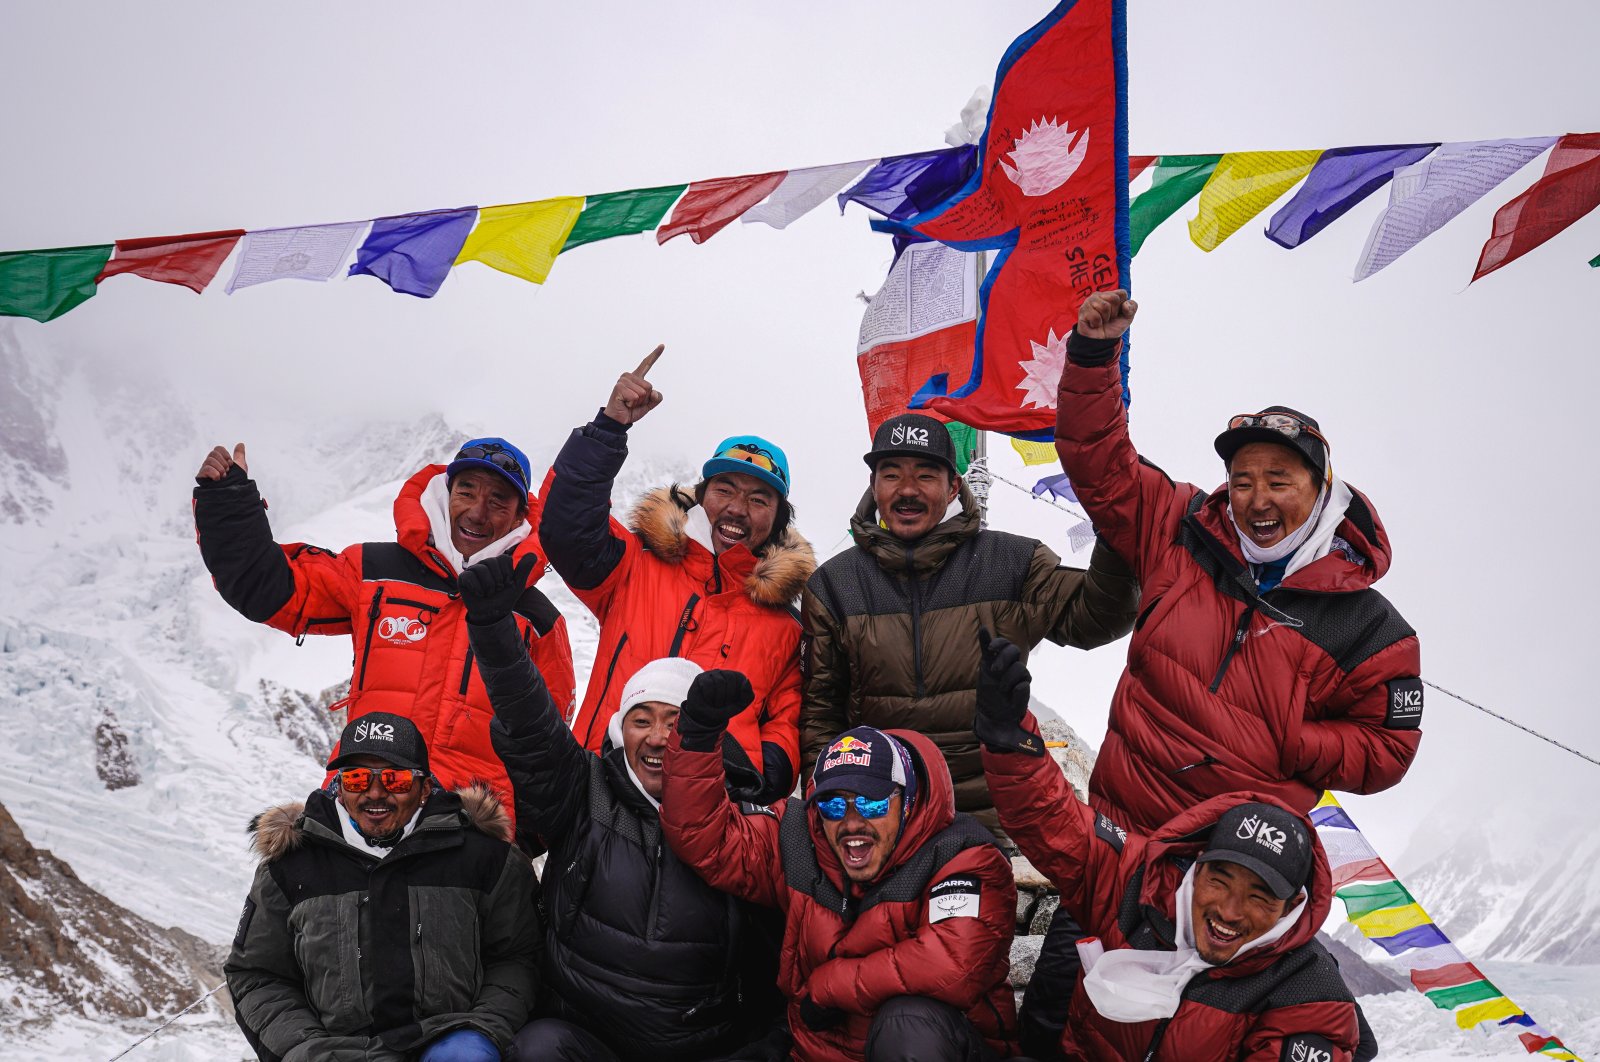 The team of Nepali climbers made history by becoming the first to summit the world's second-highest mountain, K2, in winter, Pakistan, Jan. 5, 2021. (REUTERS Photo)